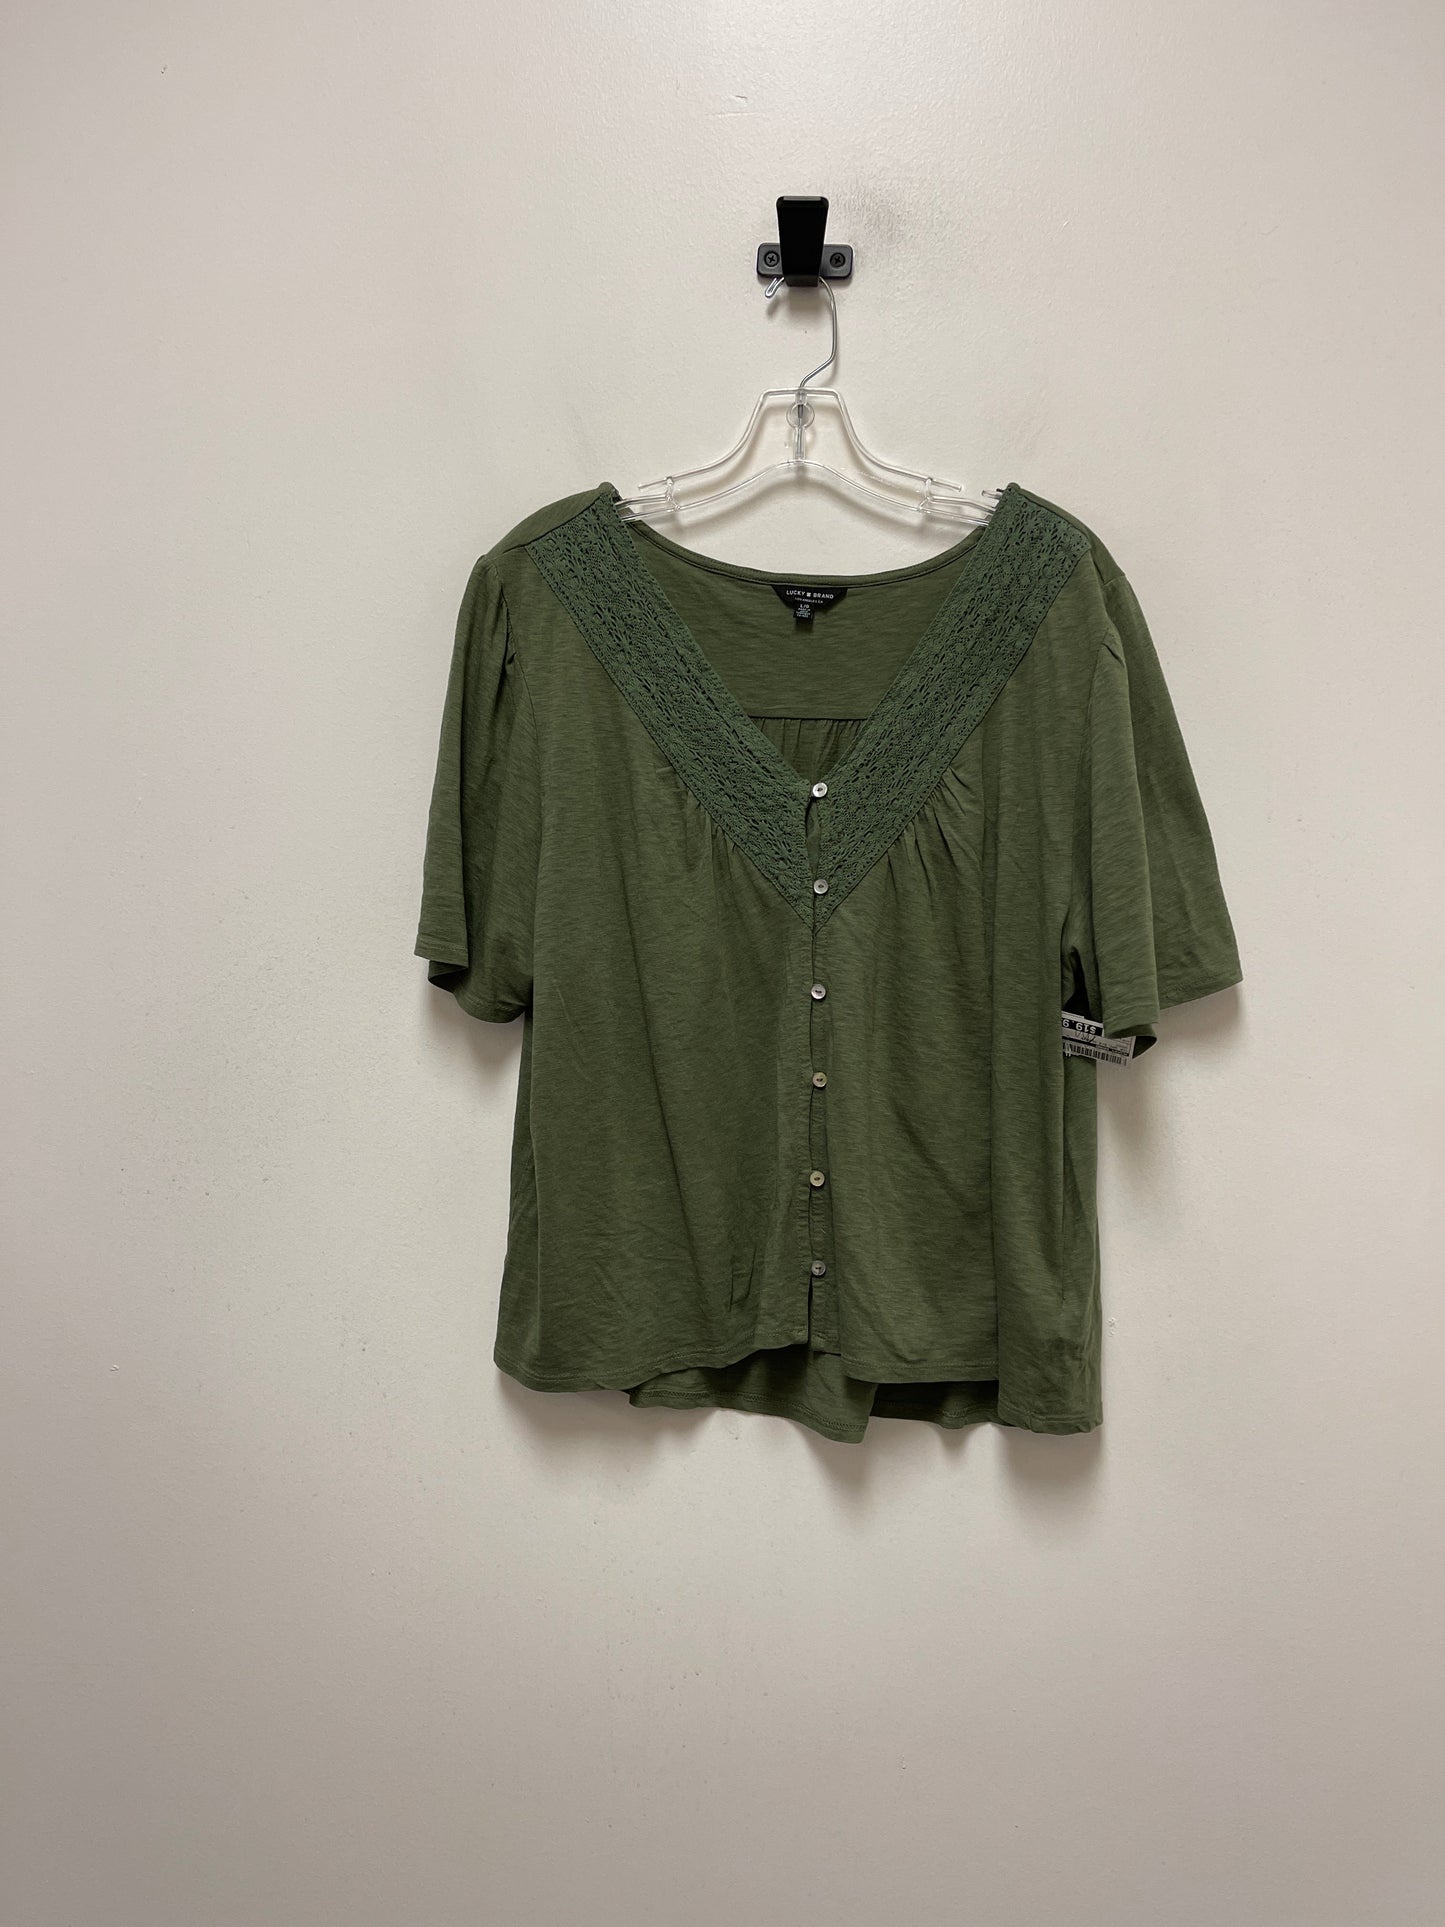 Green Top 2pc 3/4 Sleeve Lucky Brand, Size L